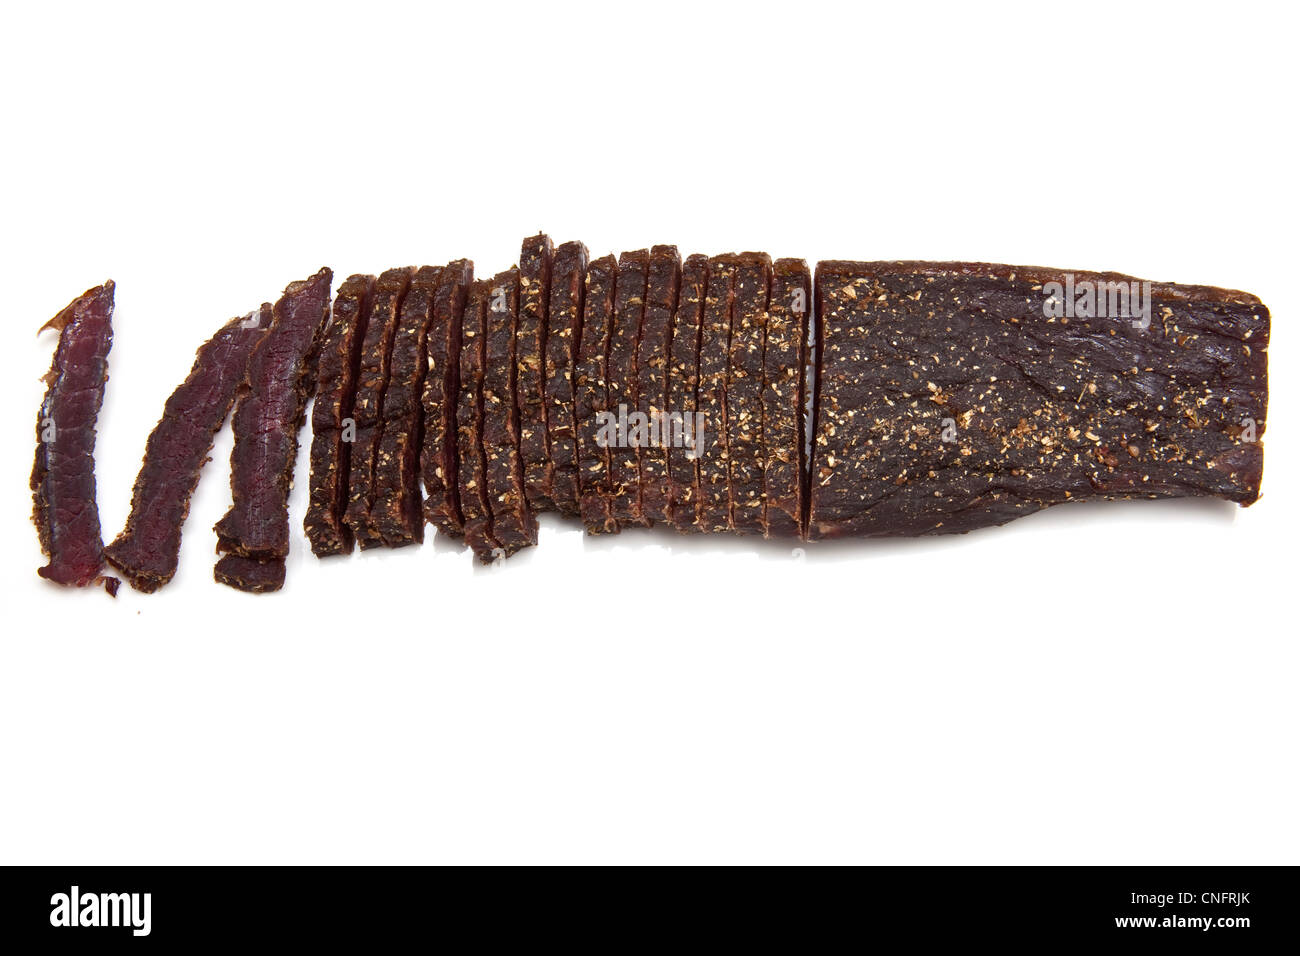 South African biltong (beef jerky) isolated on a white background Stock ...